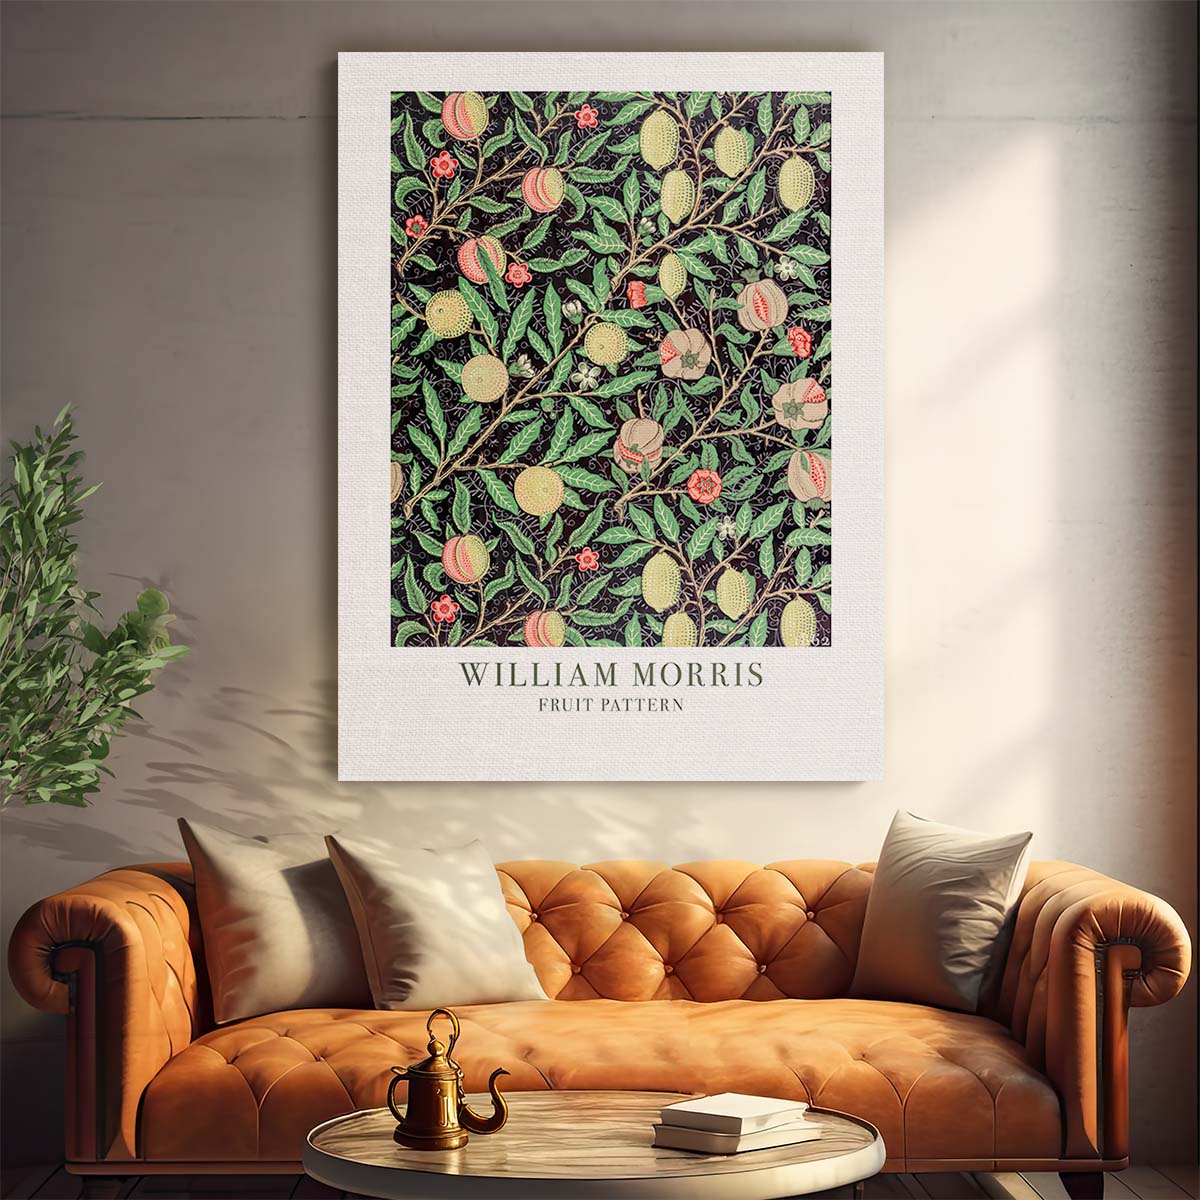 William Morris Vintage Floral Illustration Poster, Motivational Quote Wall Art by Luxuriance Designs, made in USA